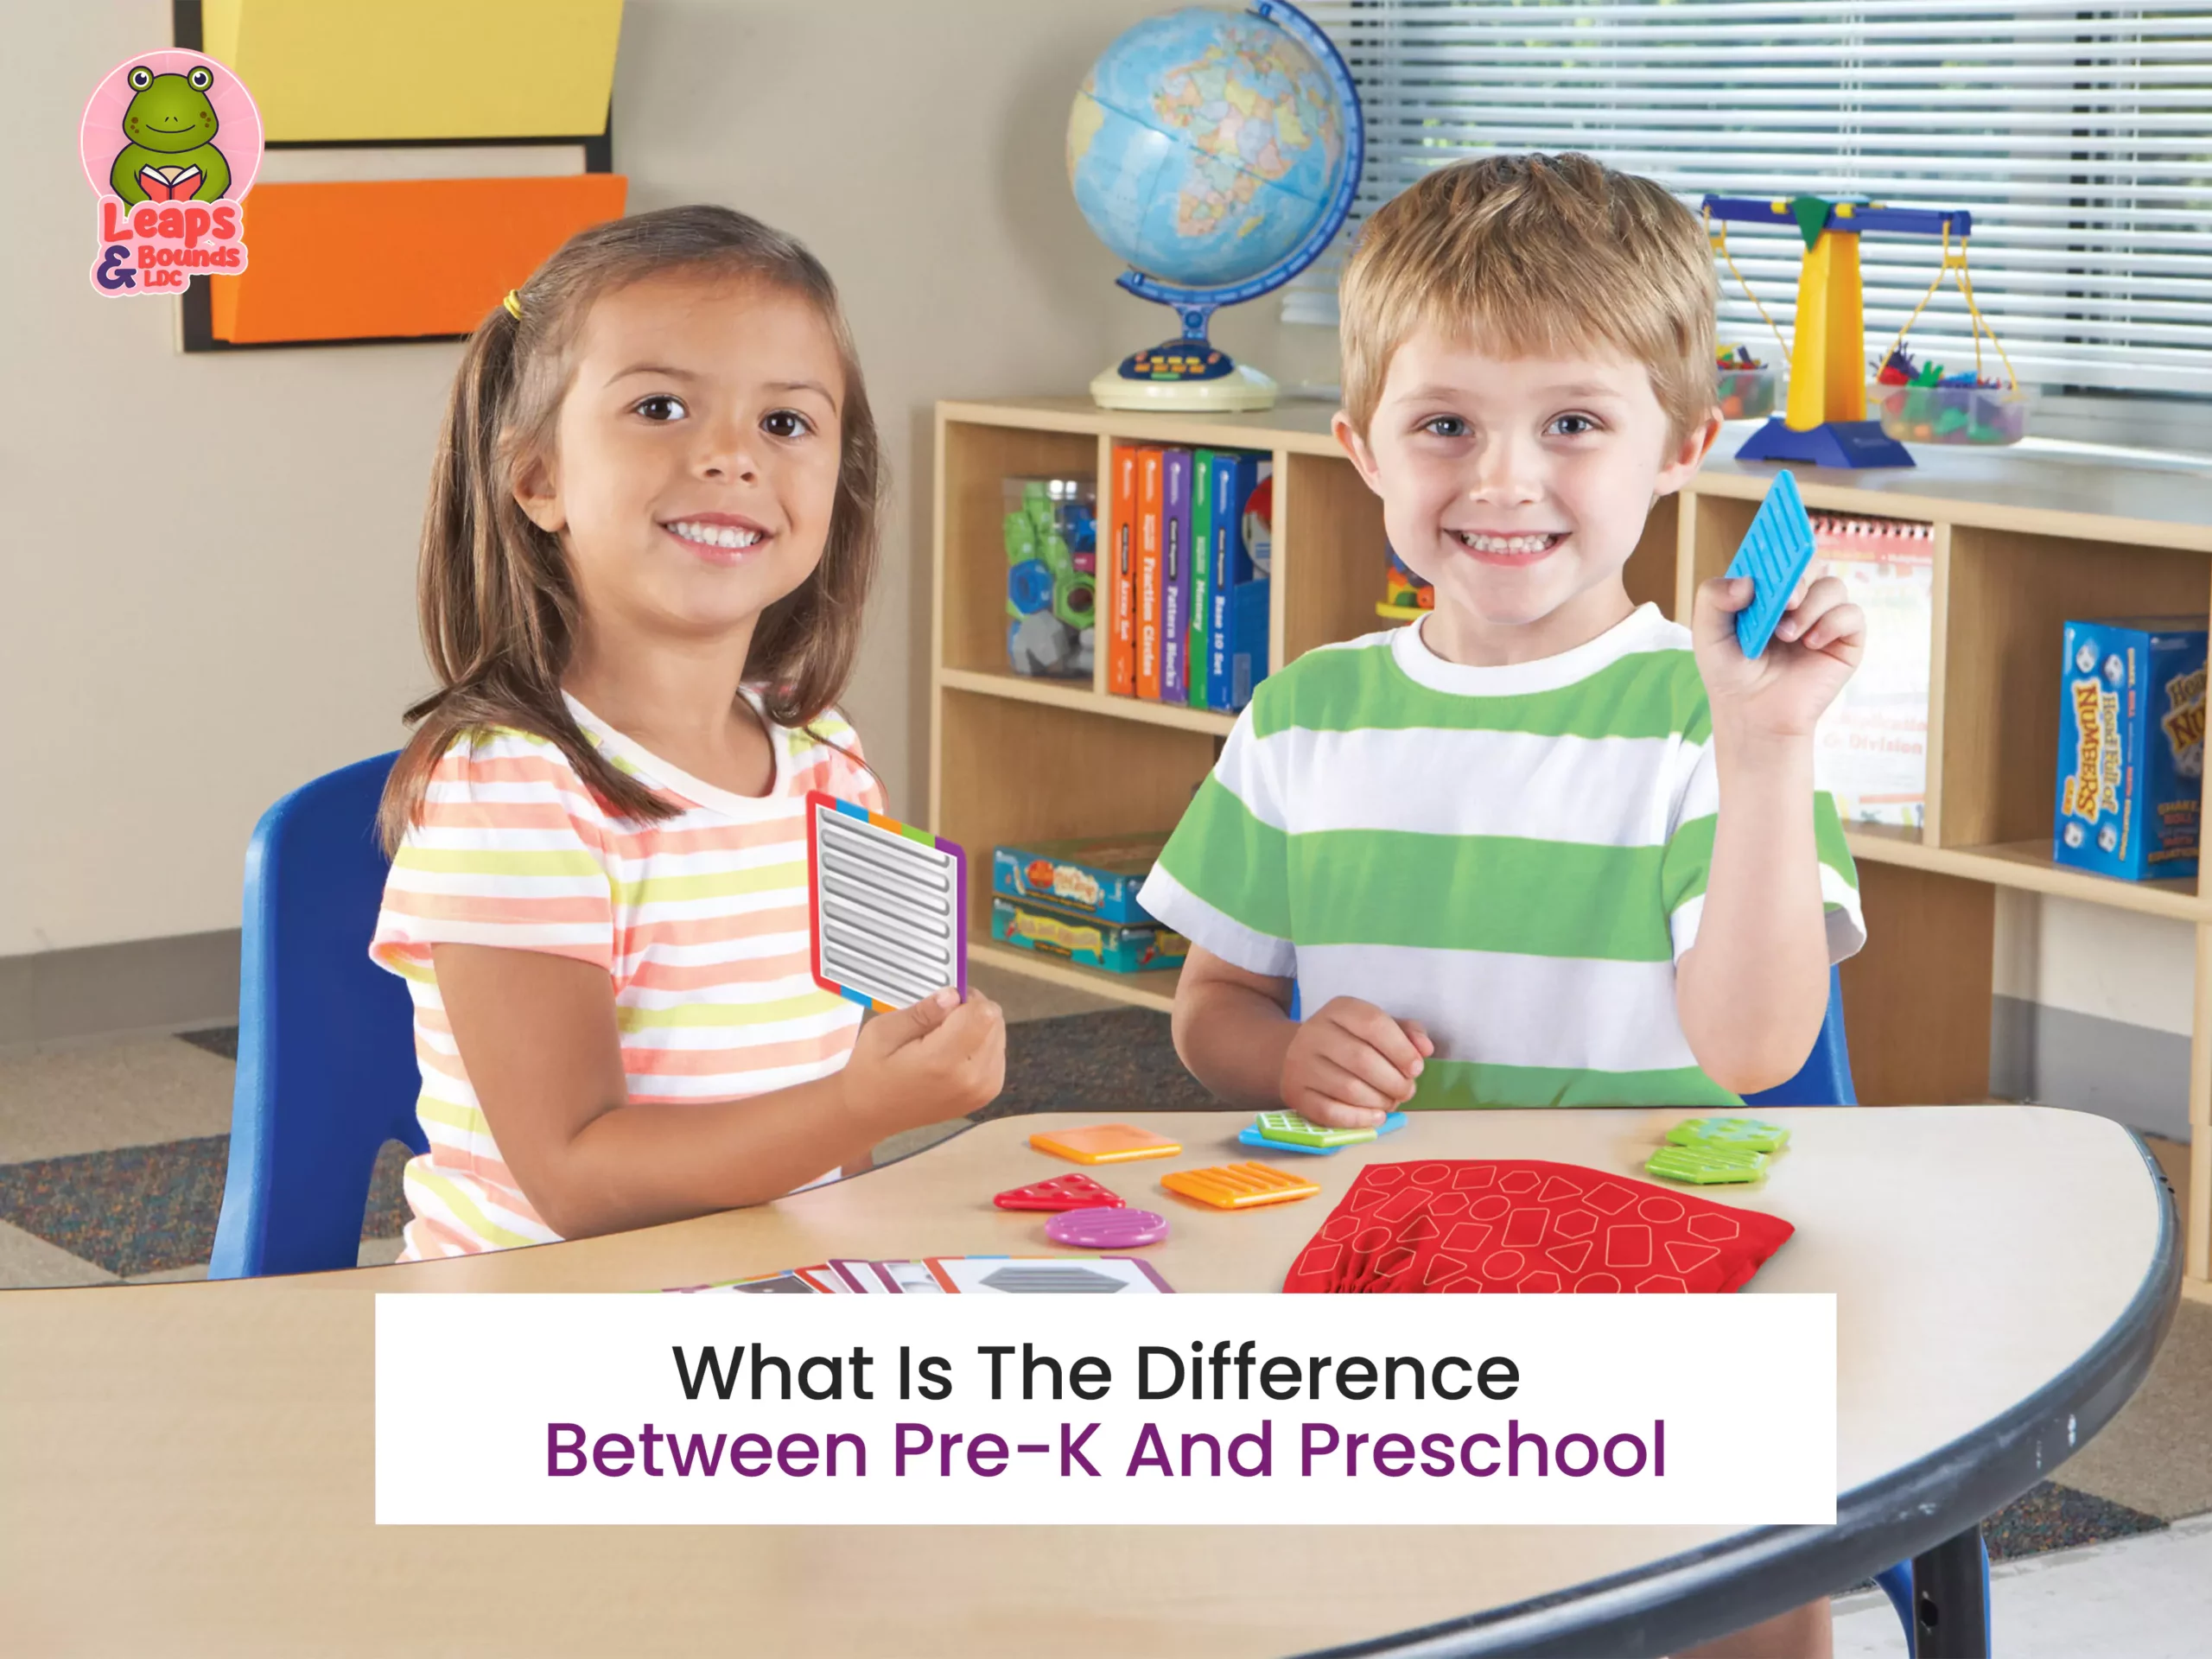 What Is The Difference Between Pre-K And Preschool